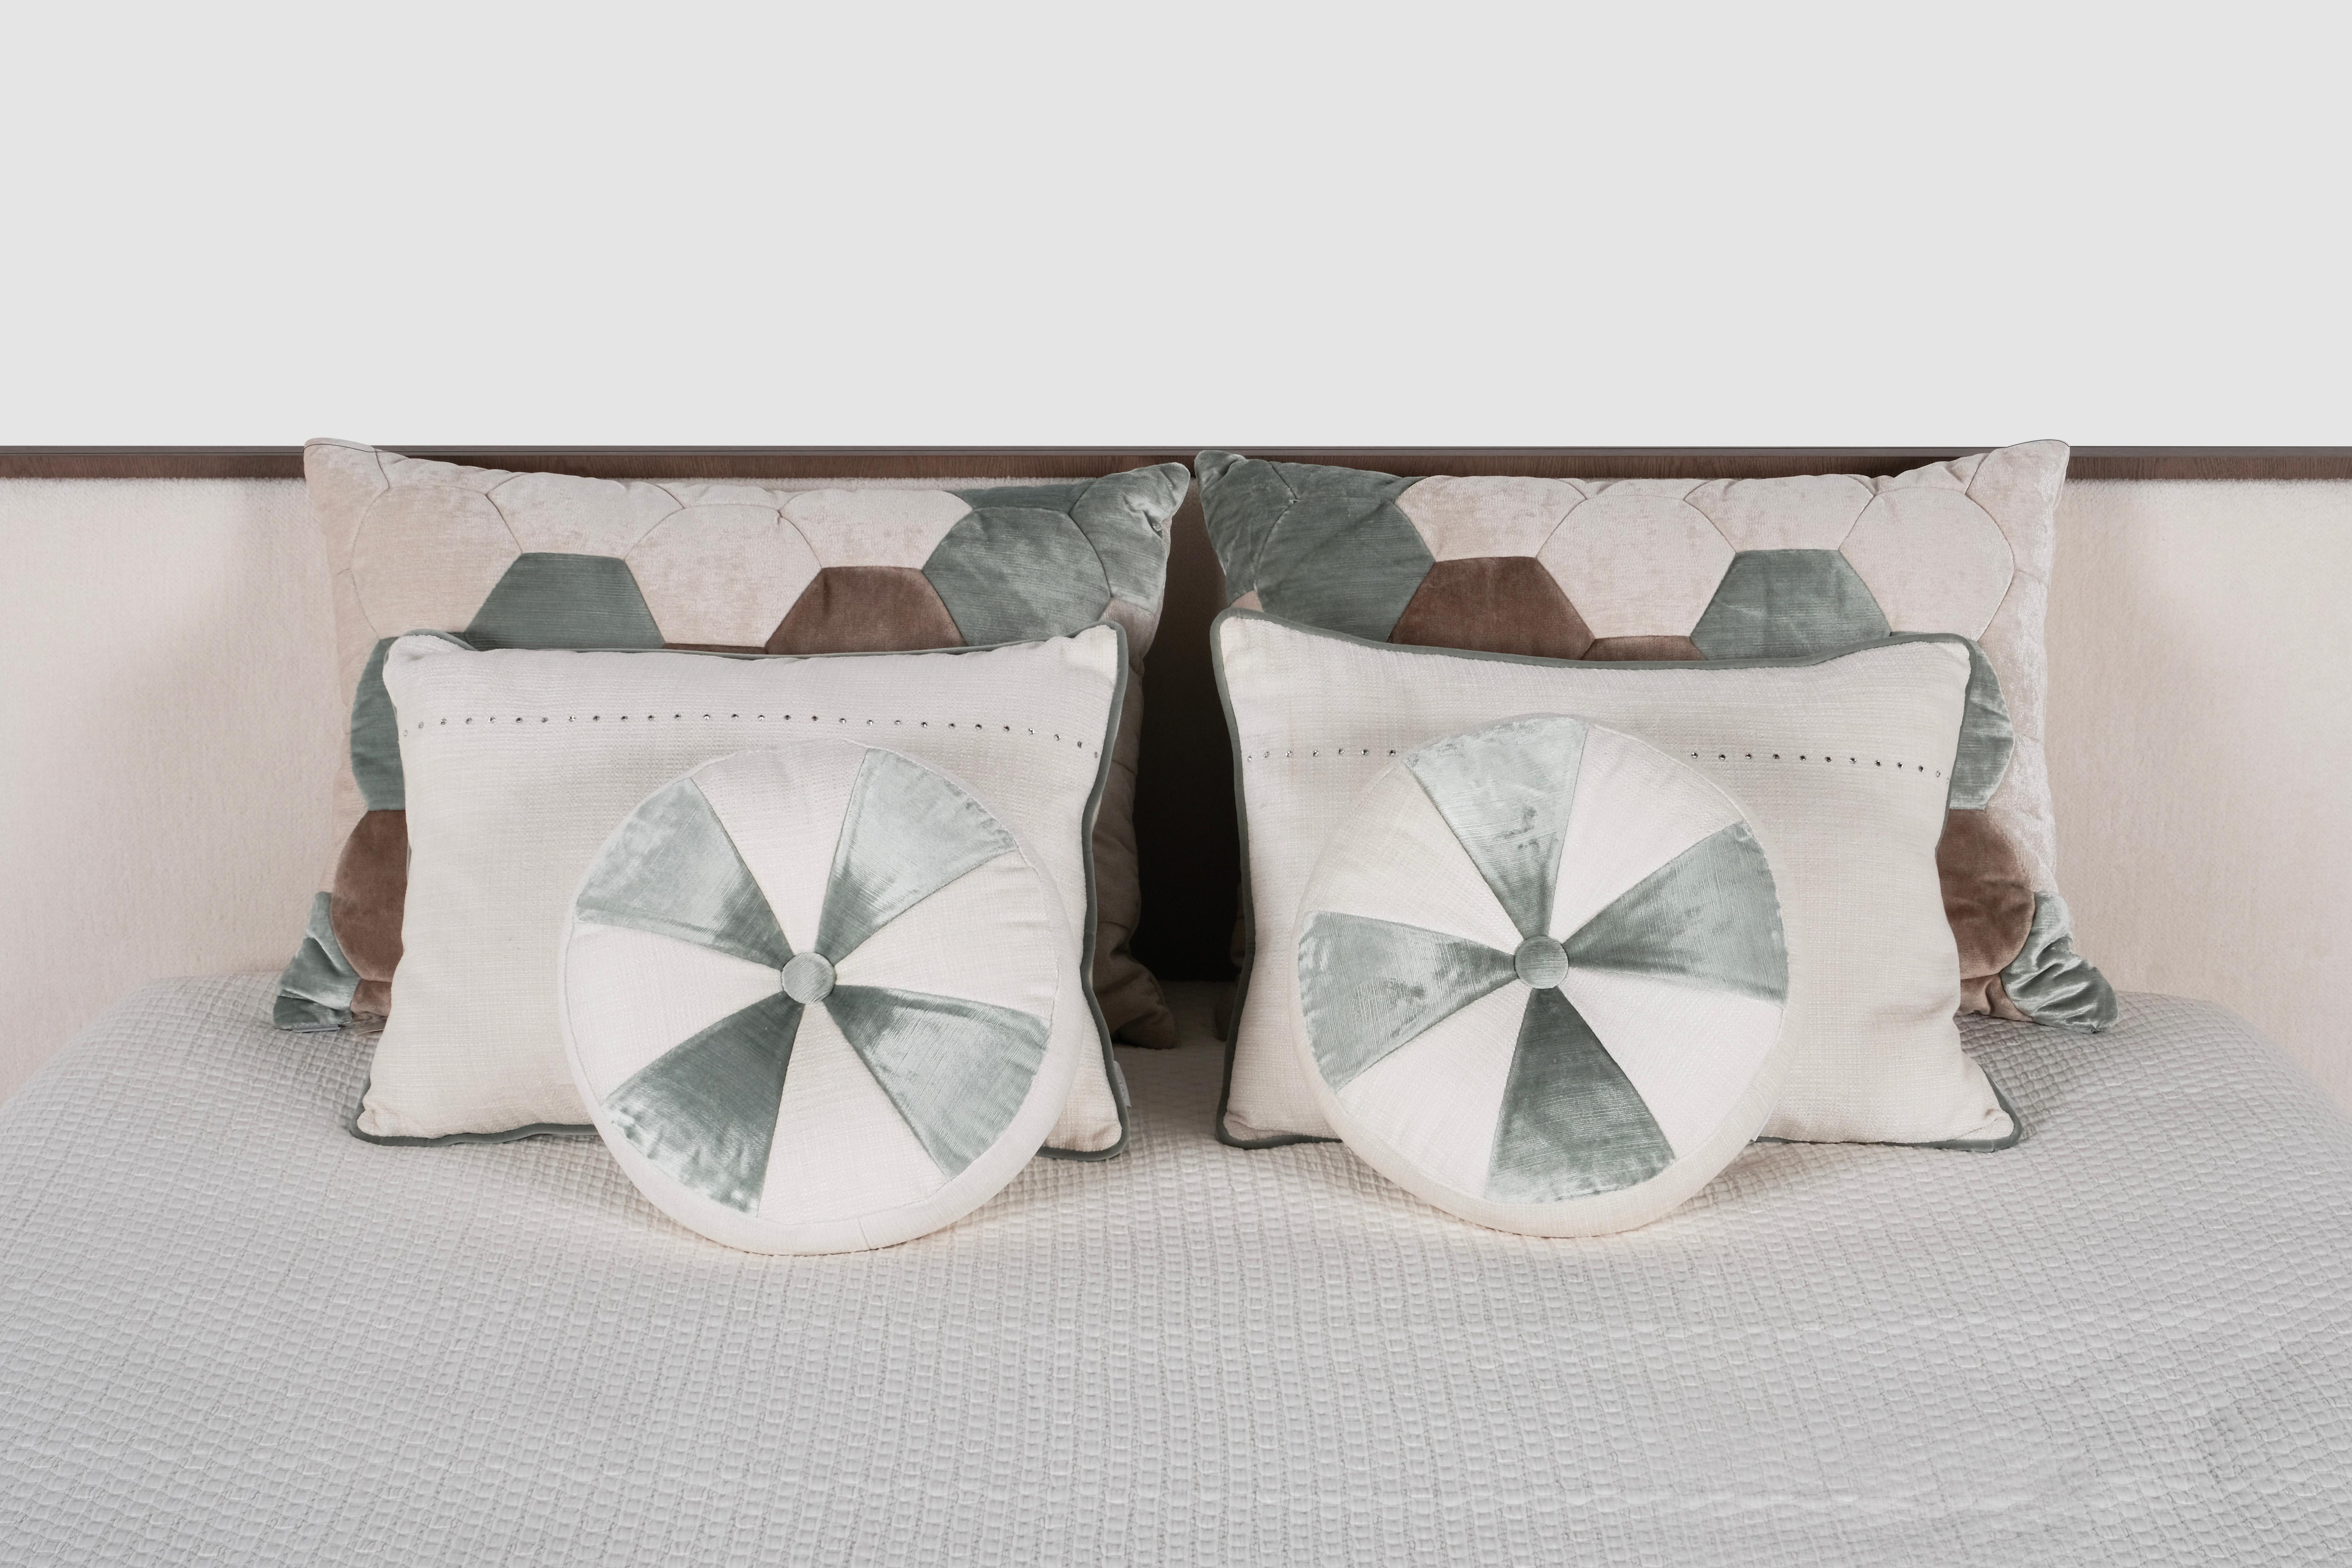 Set/6 Decorative Pillows, Lusitanus Home Collection by Greenapple.

Handmade decorative pillow set with exquisite details.

2x G700613 Rectangular decorative cushion in cream, light brown and light green velvet with soccer/football hexagon